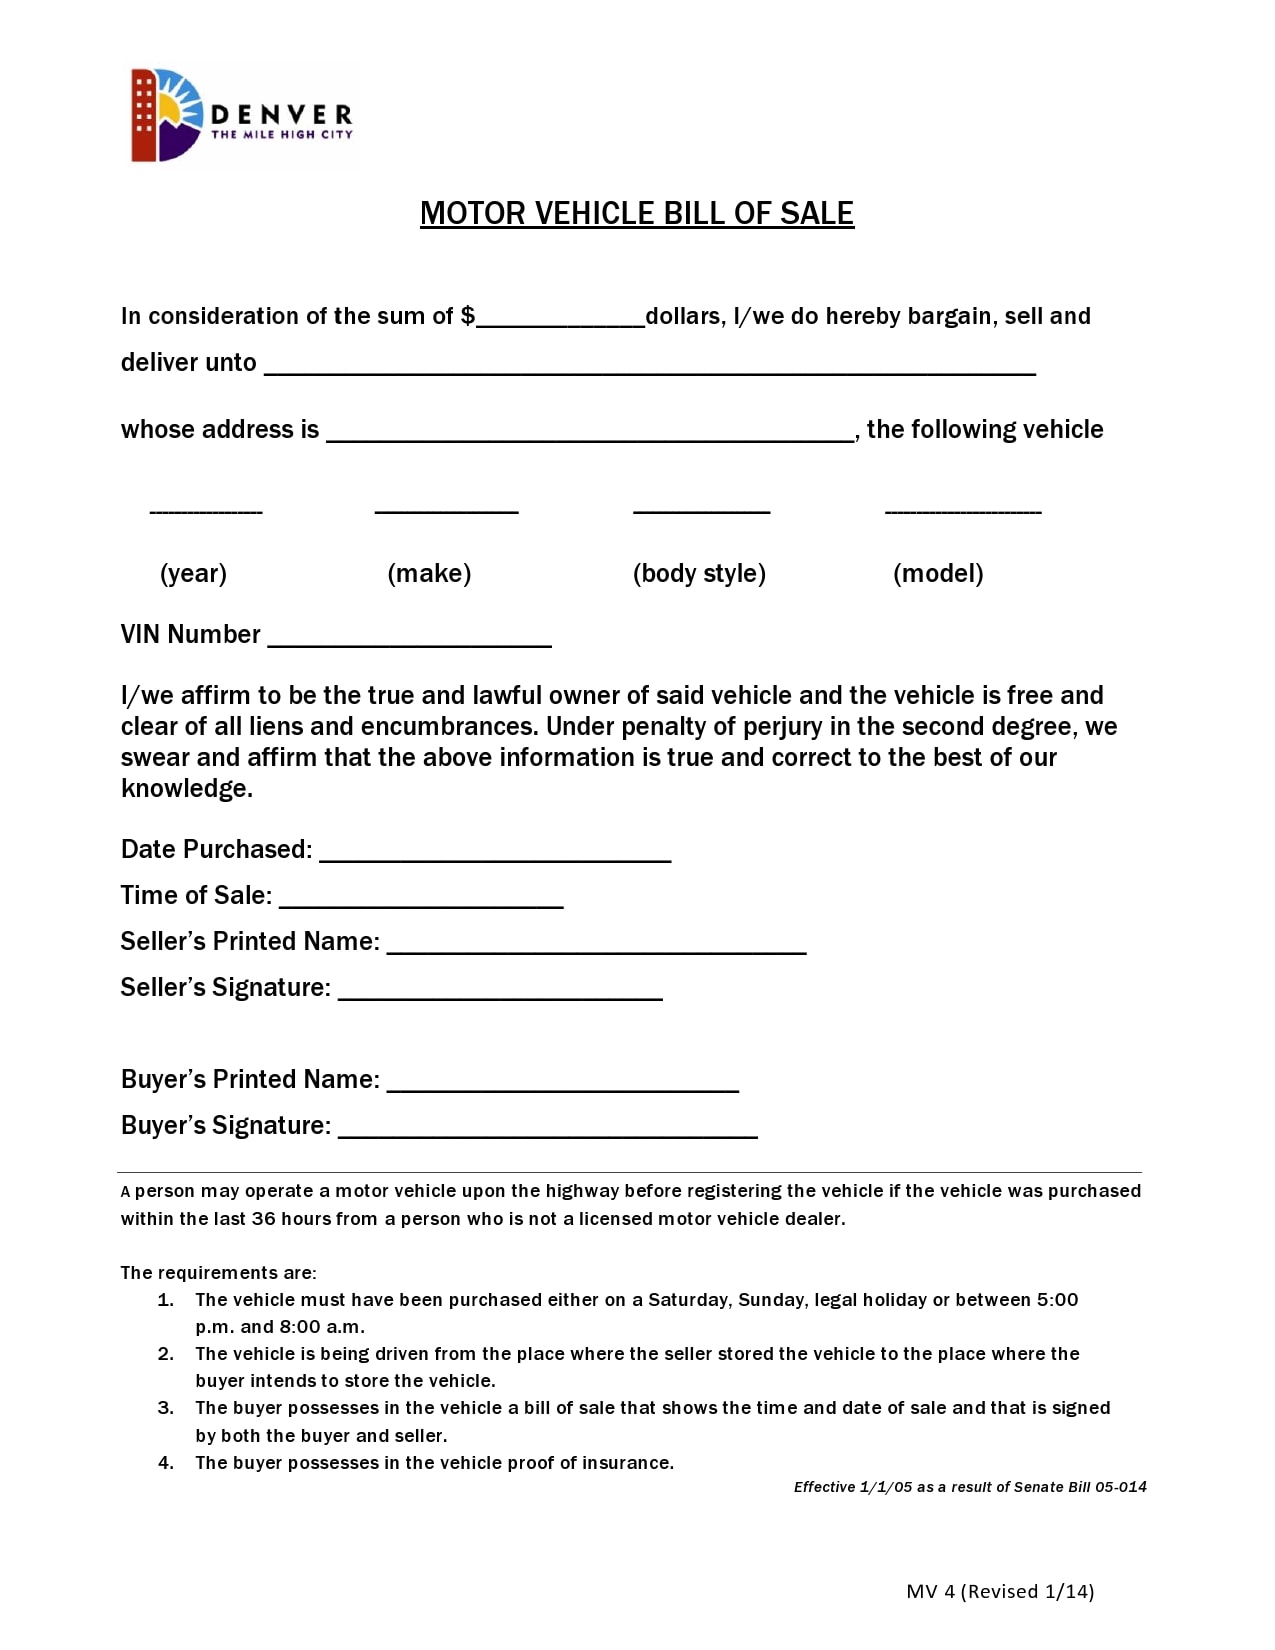 bill-of-sale-for-motorcycle-template